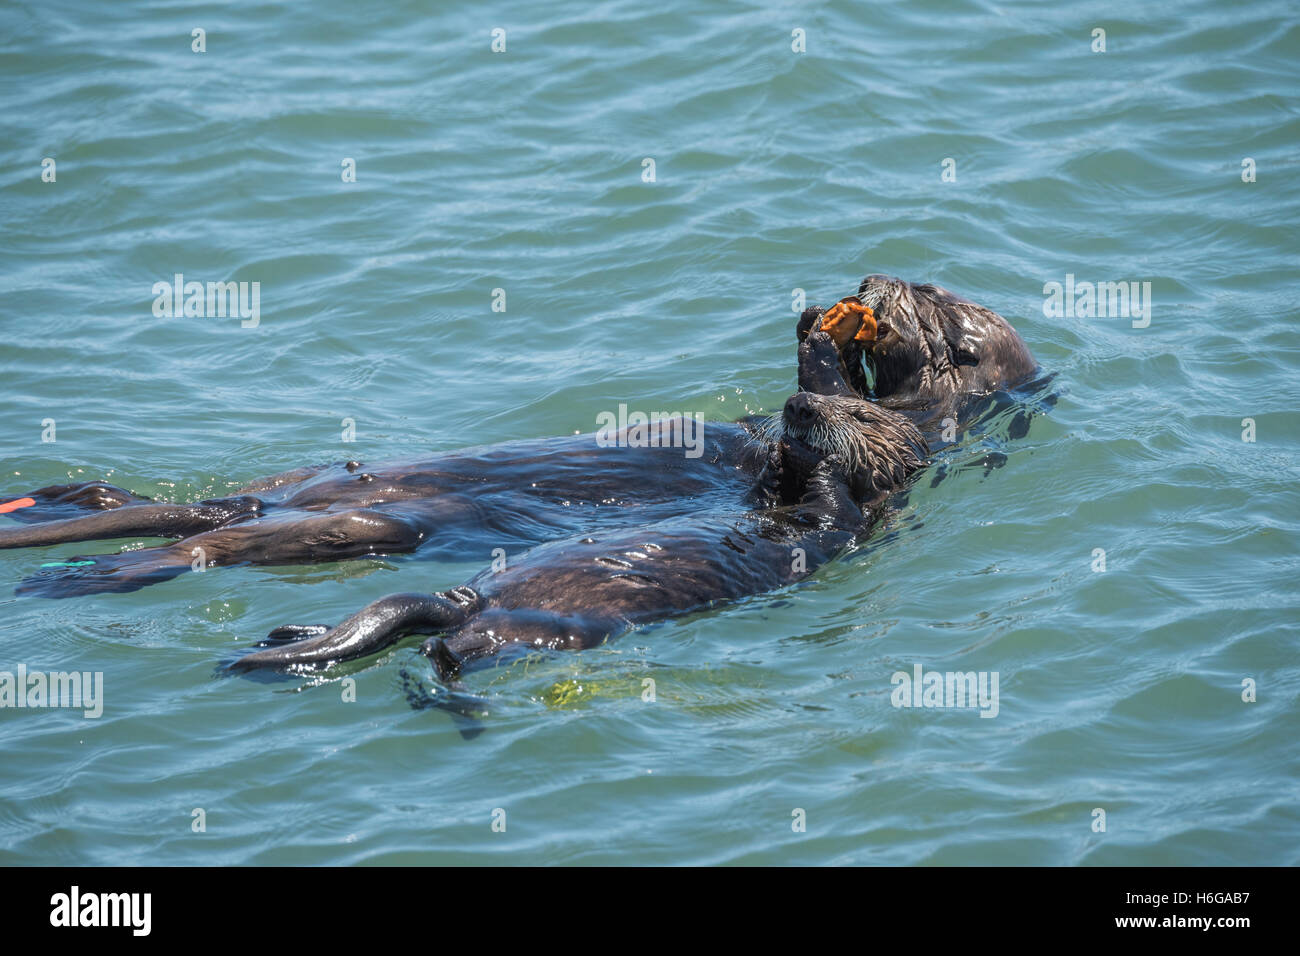 southern sea otter, Enhydra lutris nereis, mother and pup share a meal of mussels, Elkhorn Slough, California, USA Stock Photo